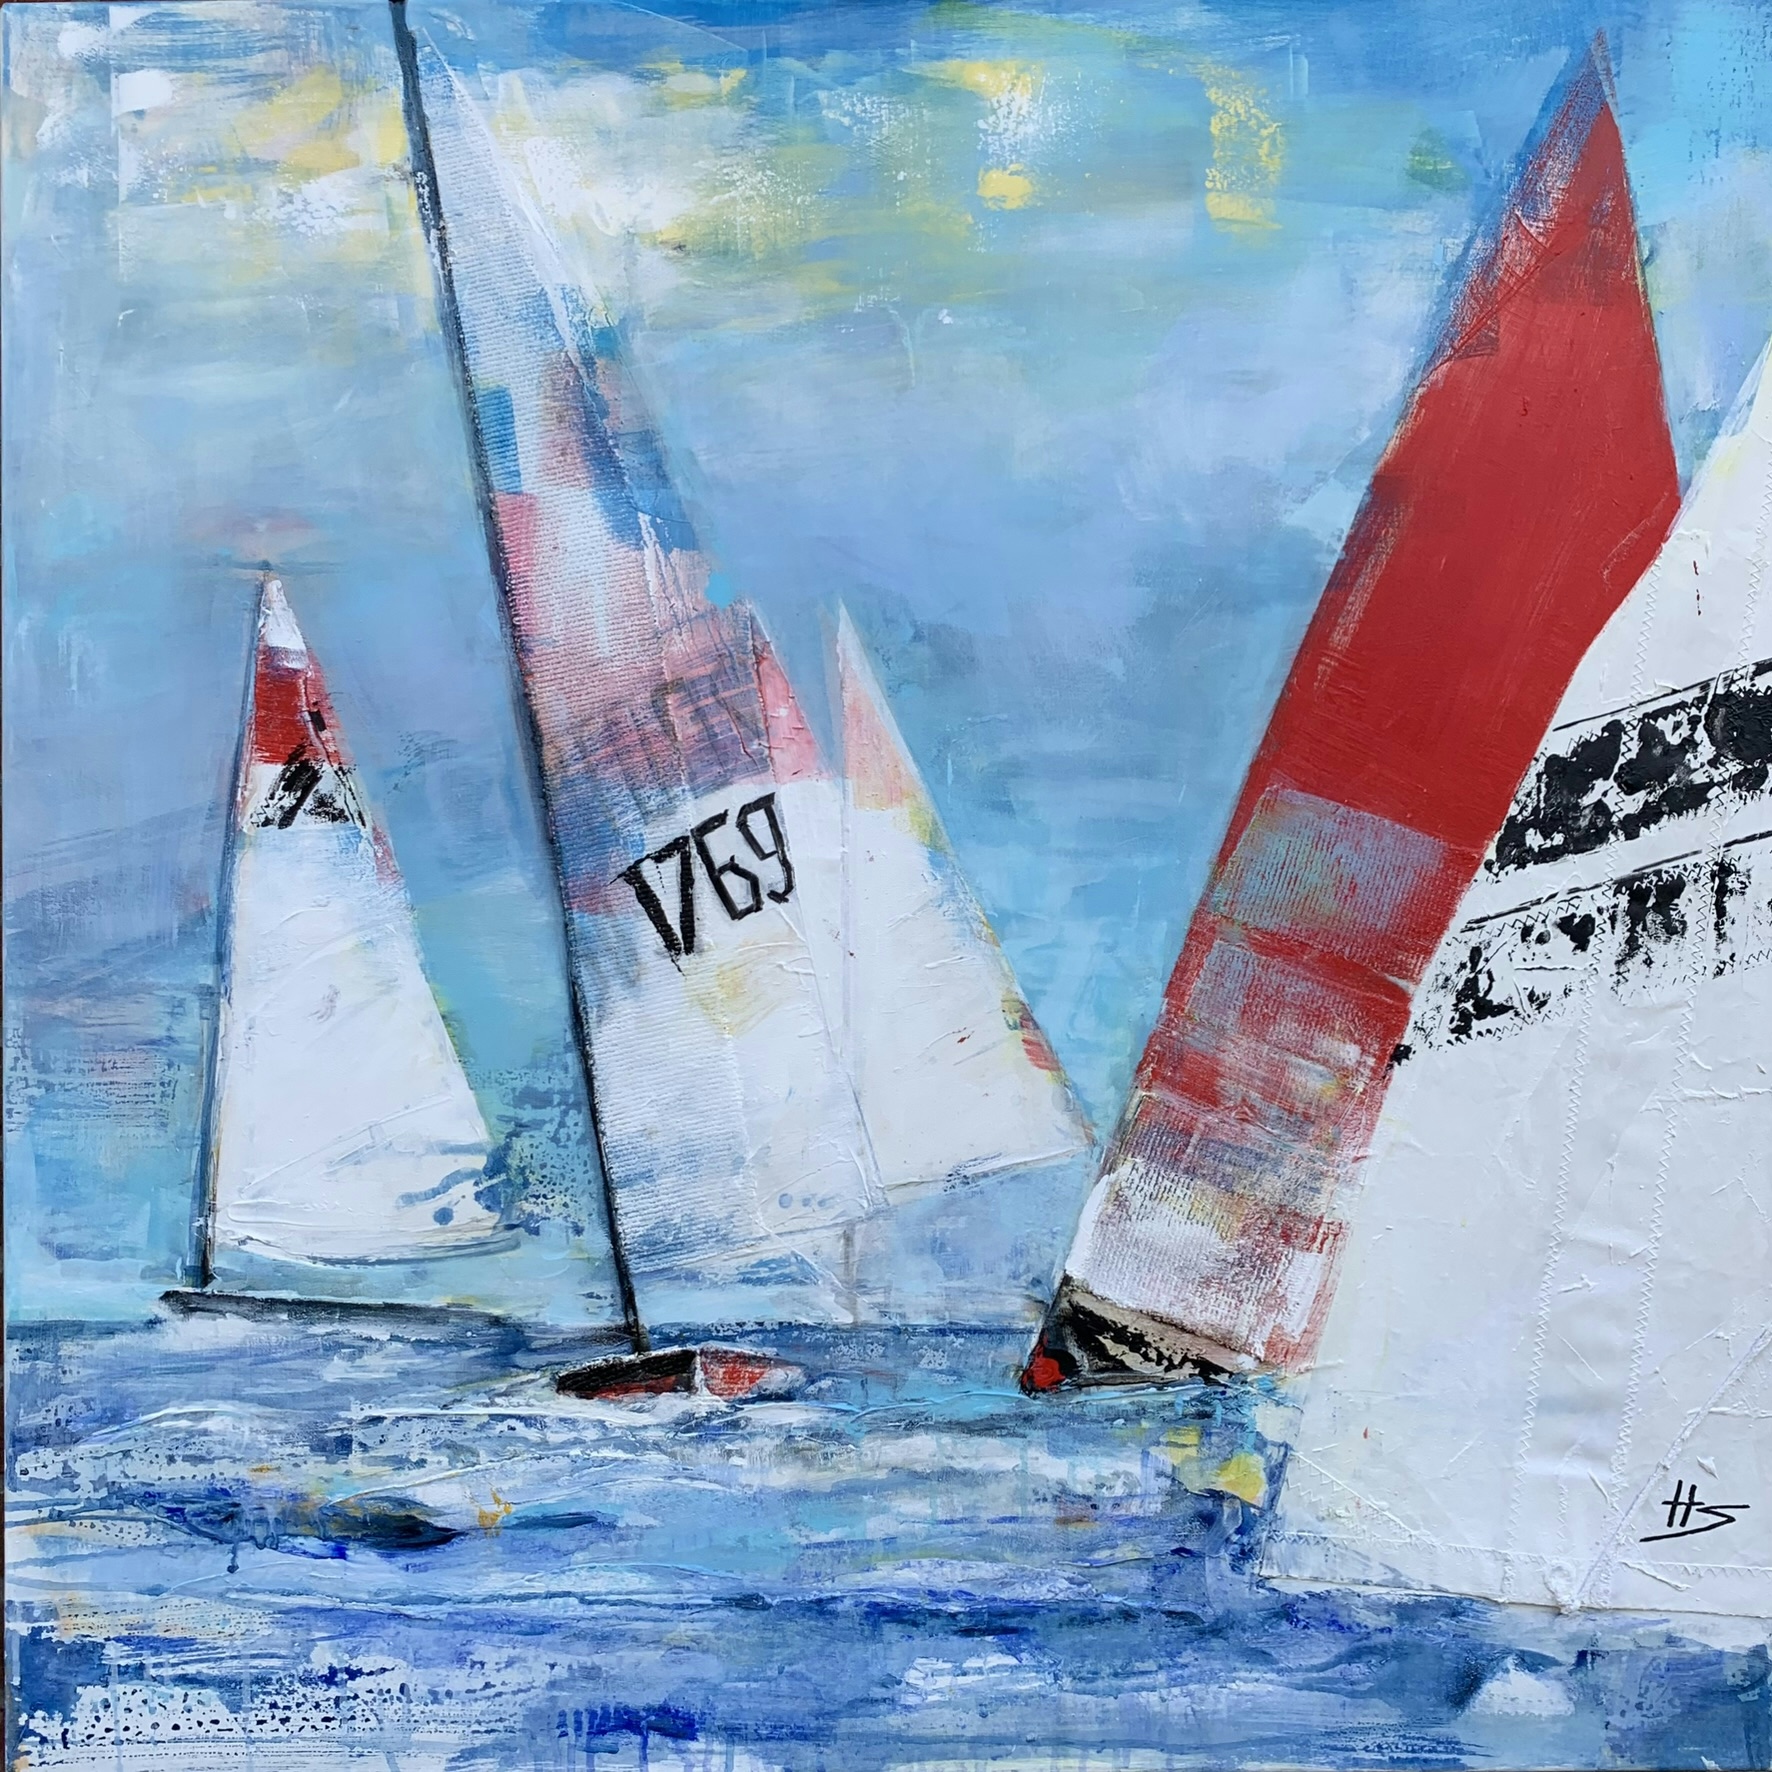 Artwork by Heike Schümann depicts abstractly rendered sailboats